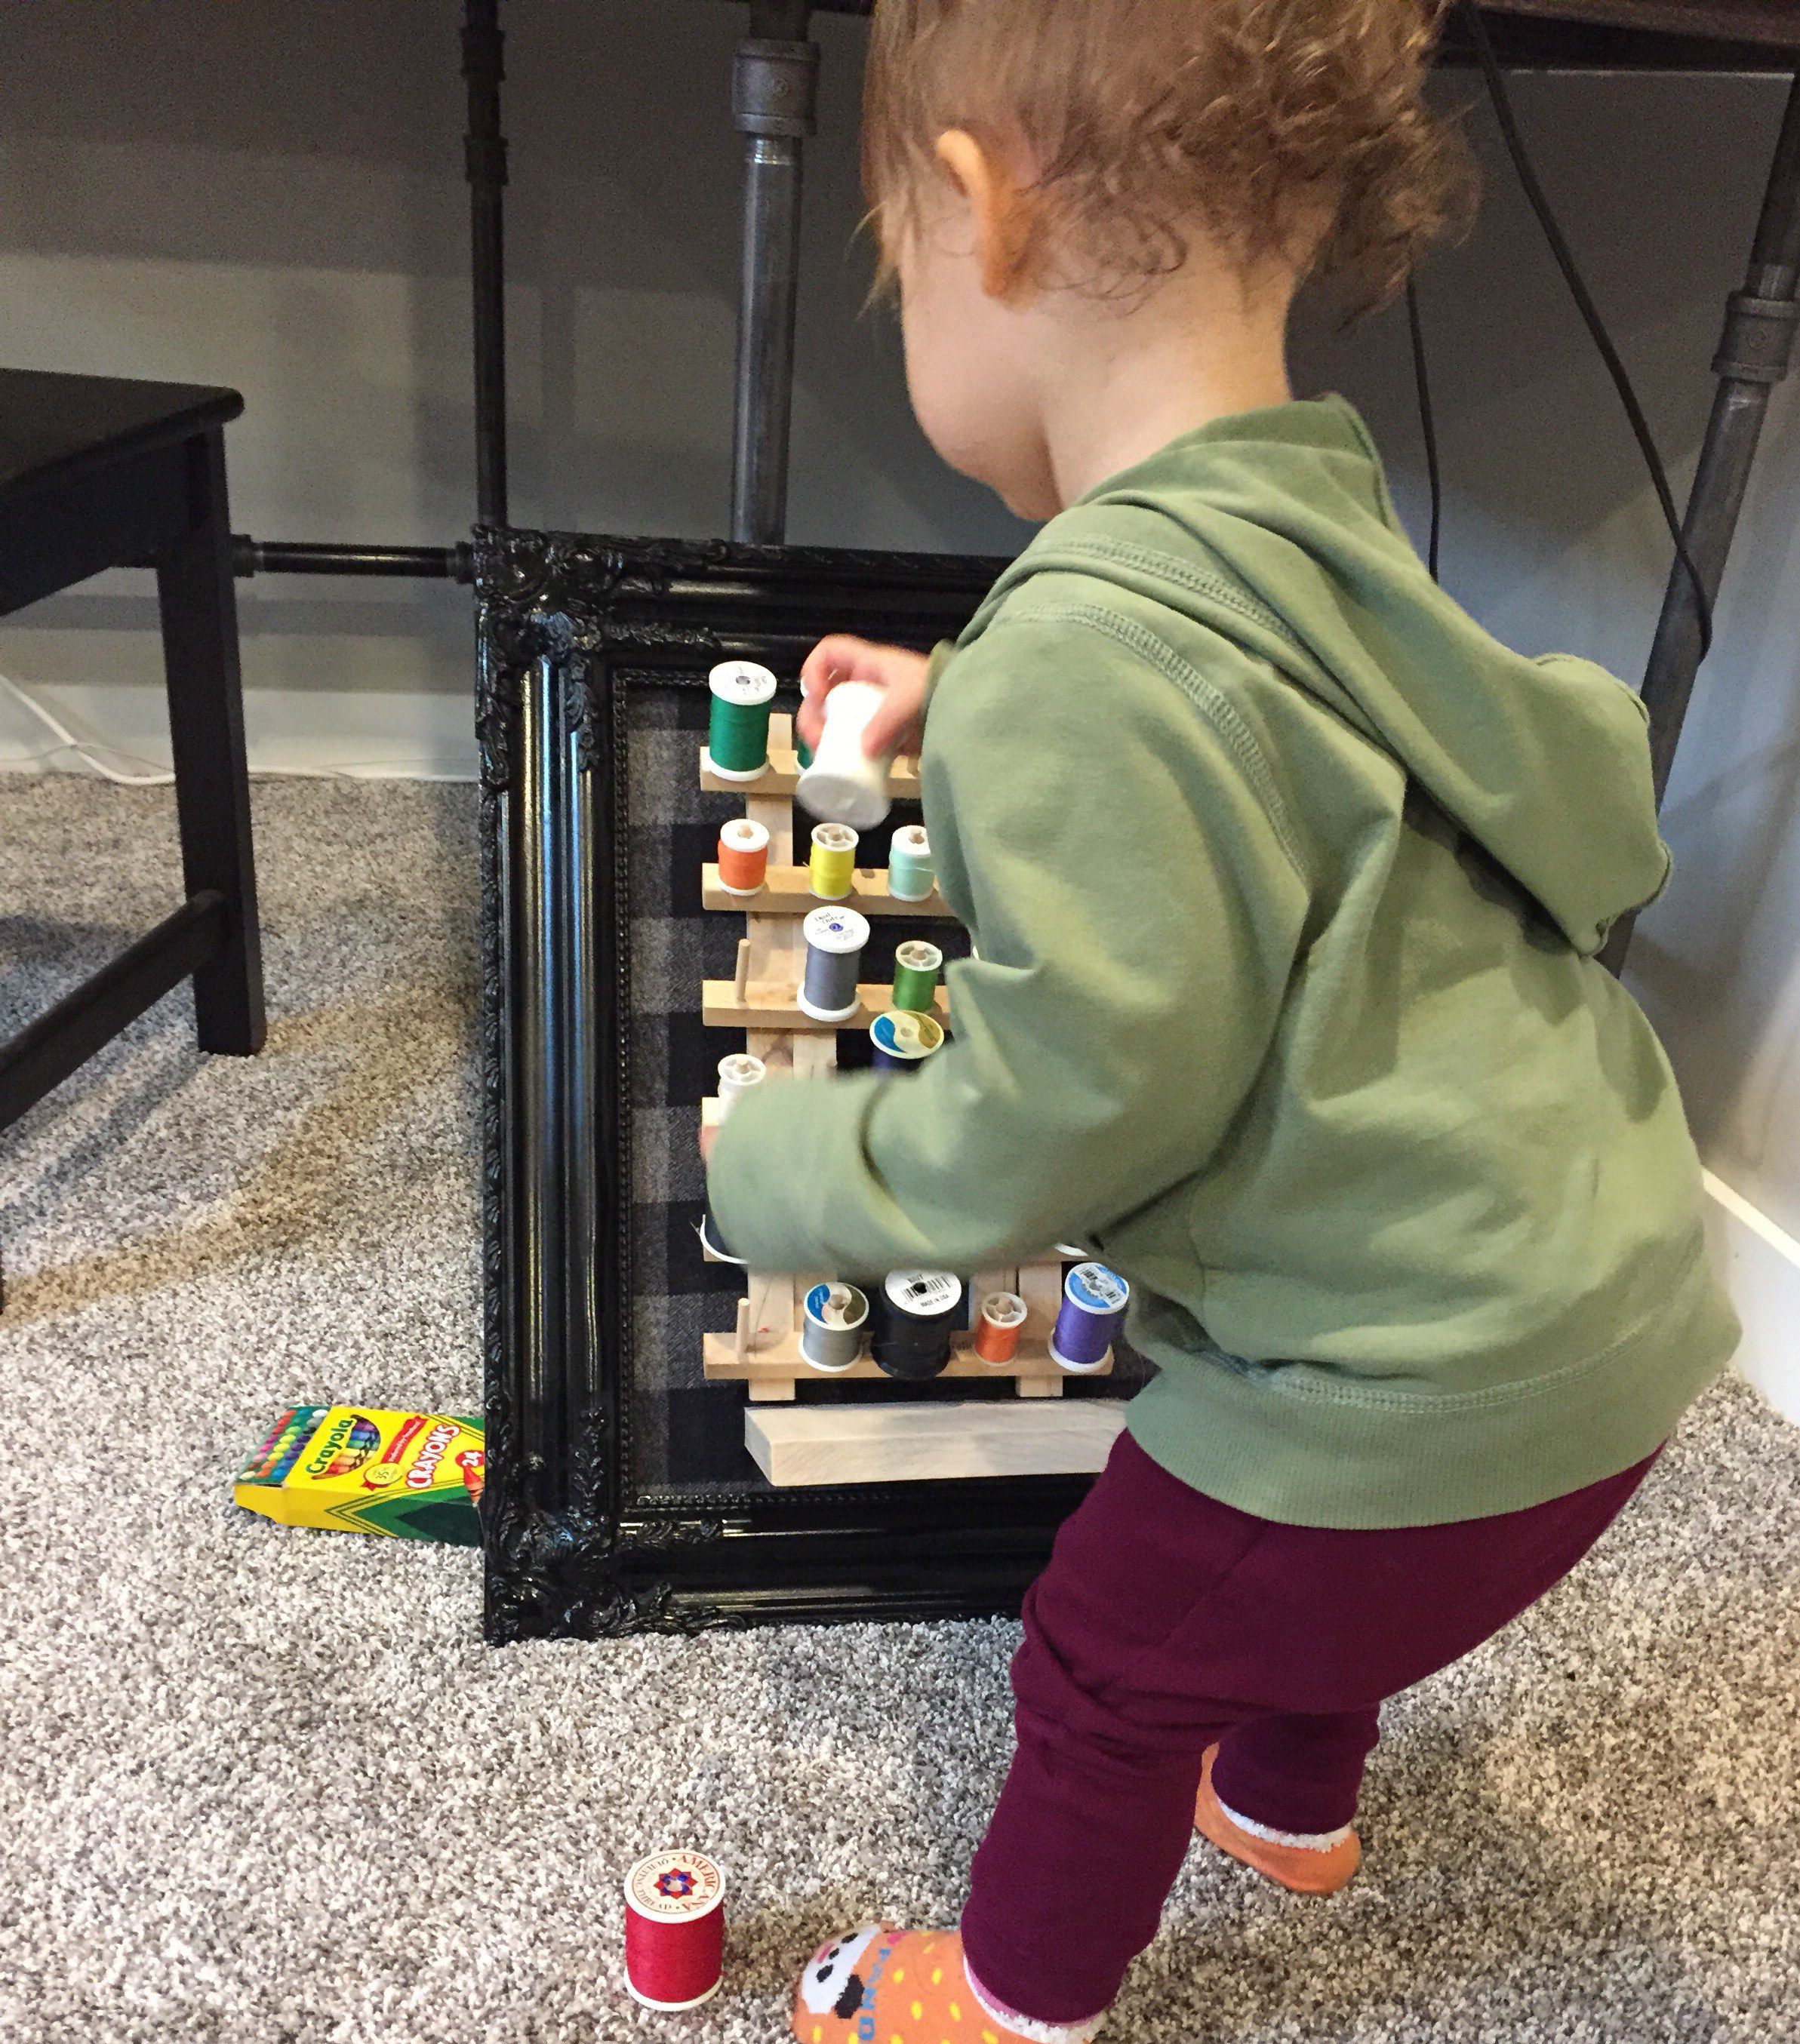 Cue the Creativity: Sharing Activities With Your Toddler